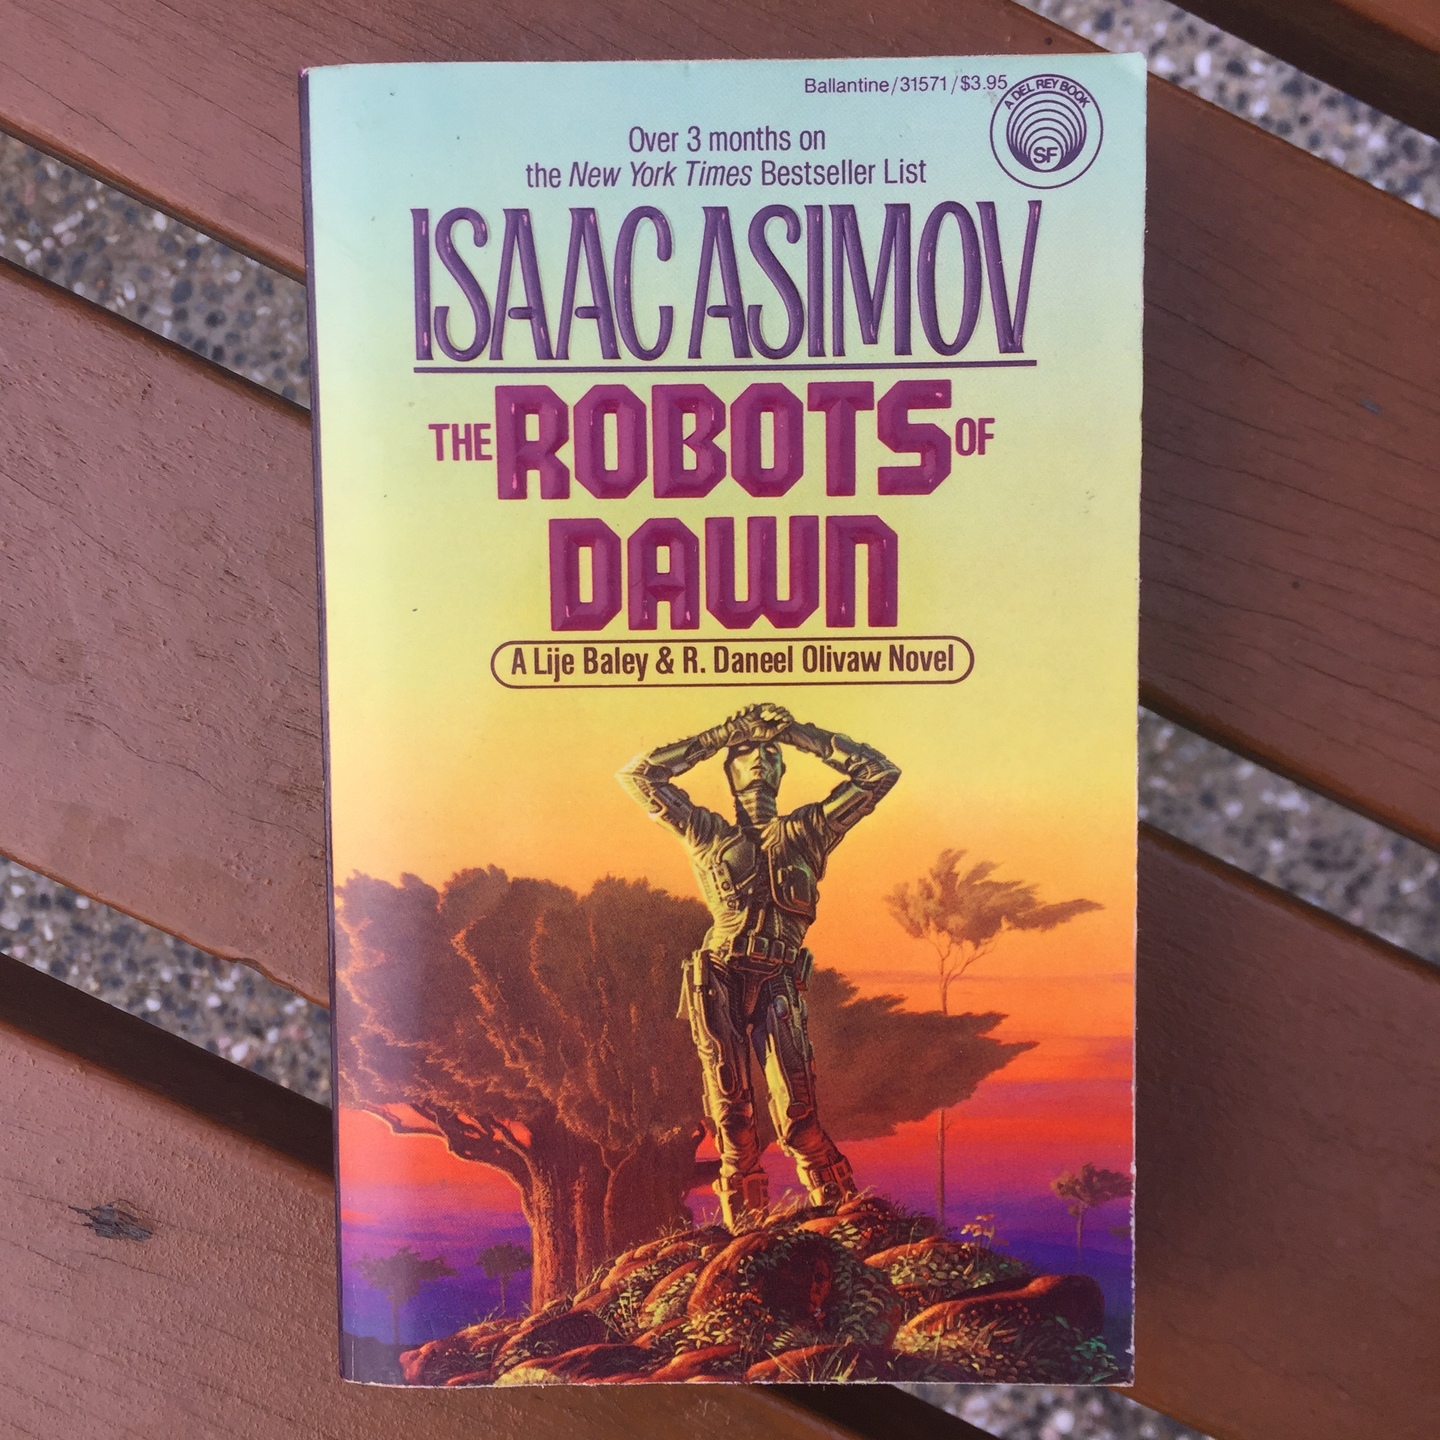 The Robots of Dawn by Isaac Asimov [Paperback]